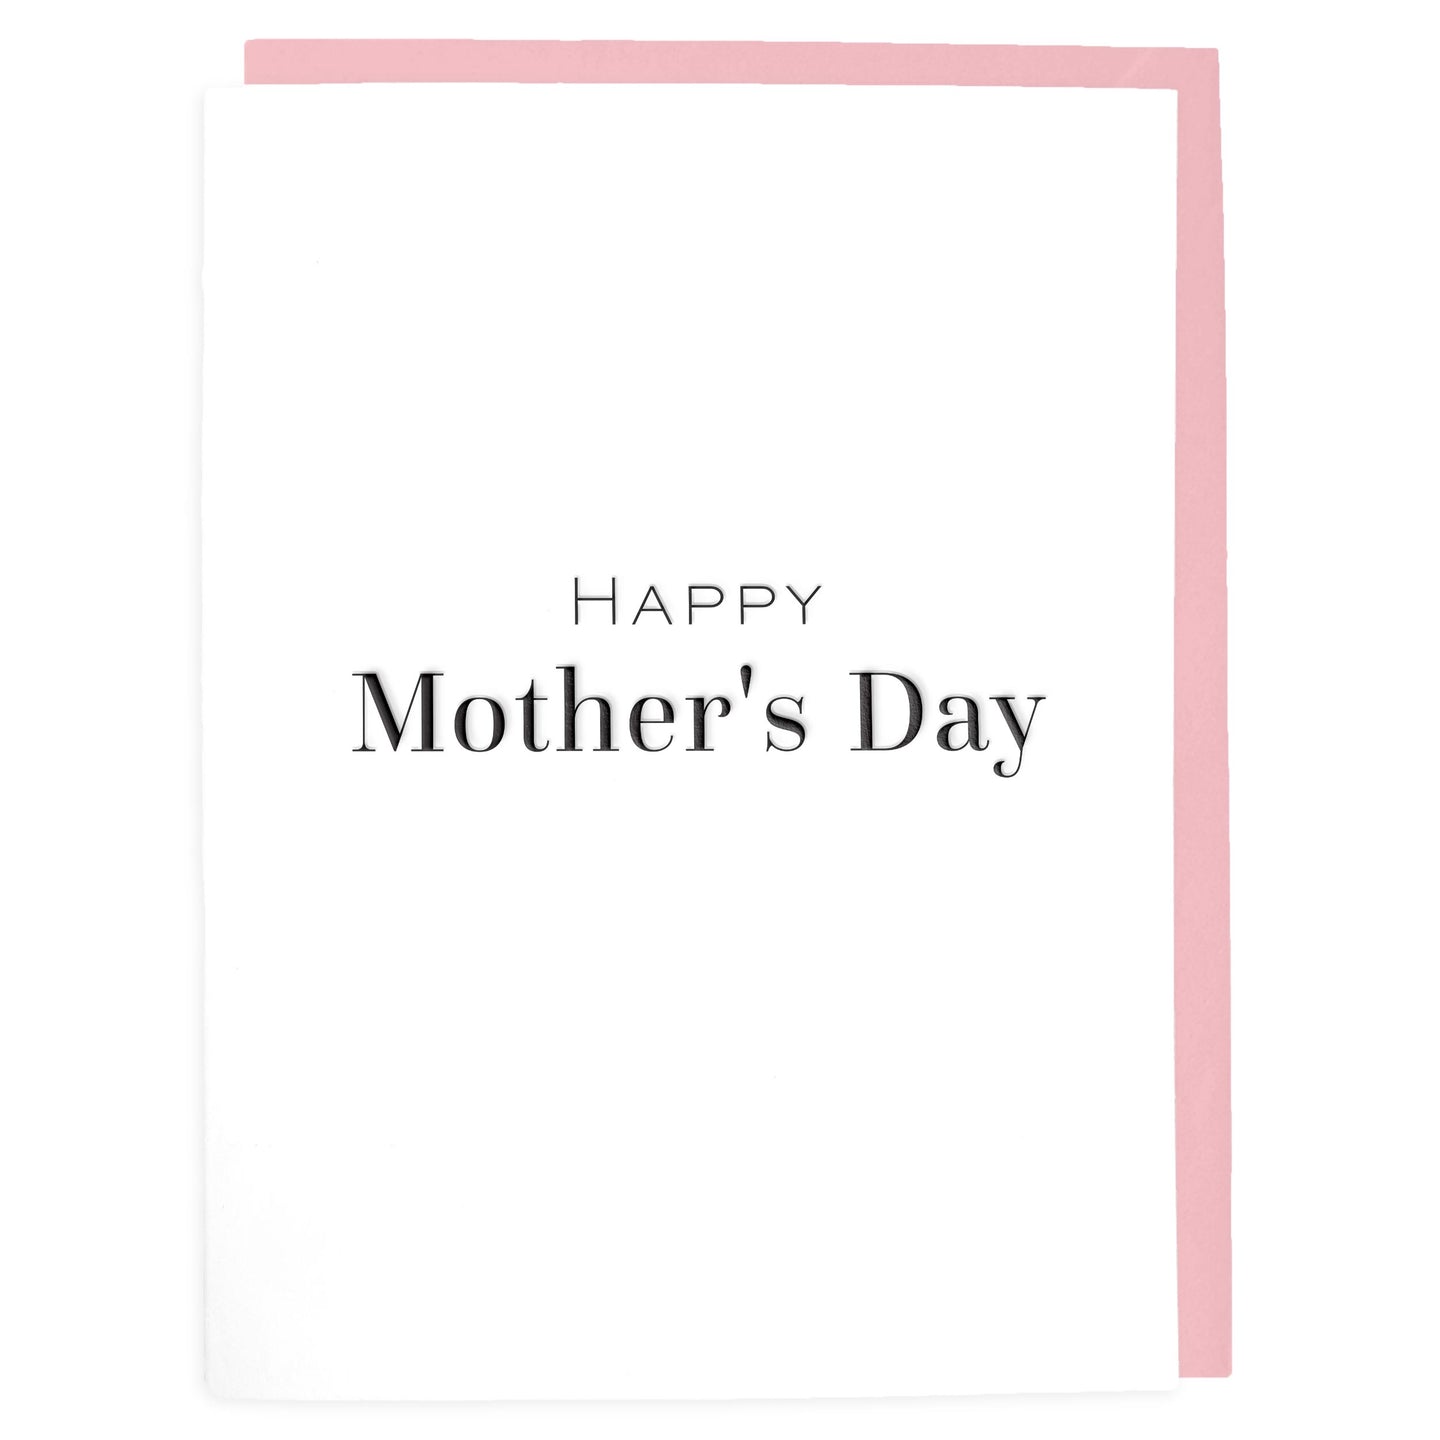 Happy Mother's Day Card - Letterpress Greeting Card - Tea and Becky